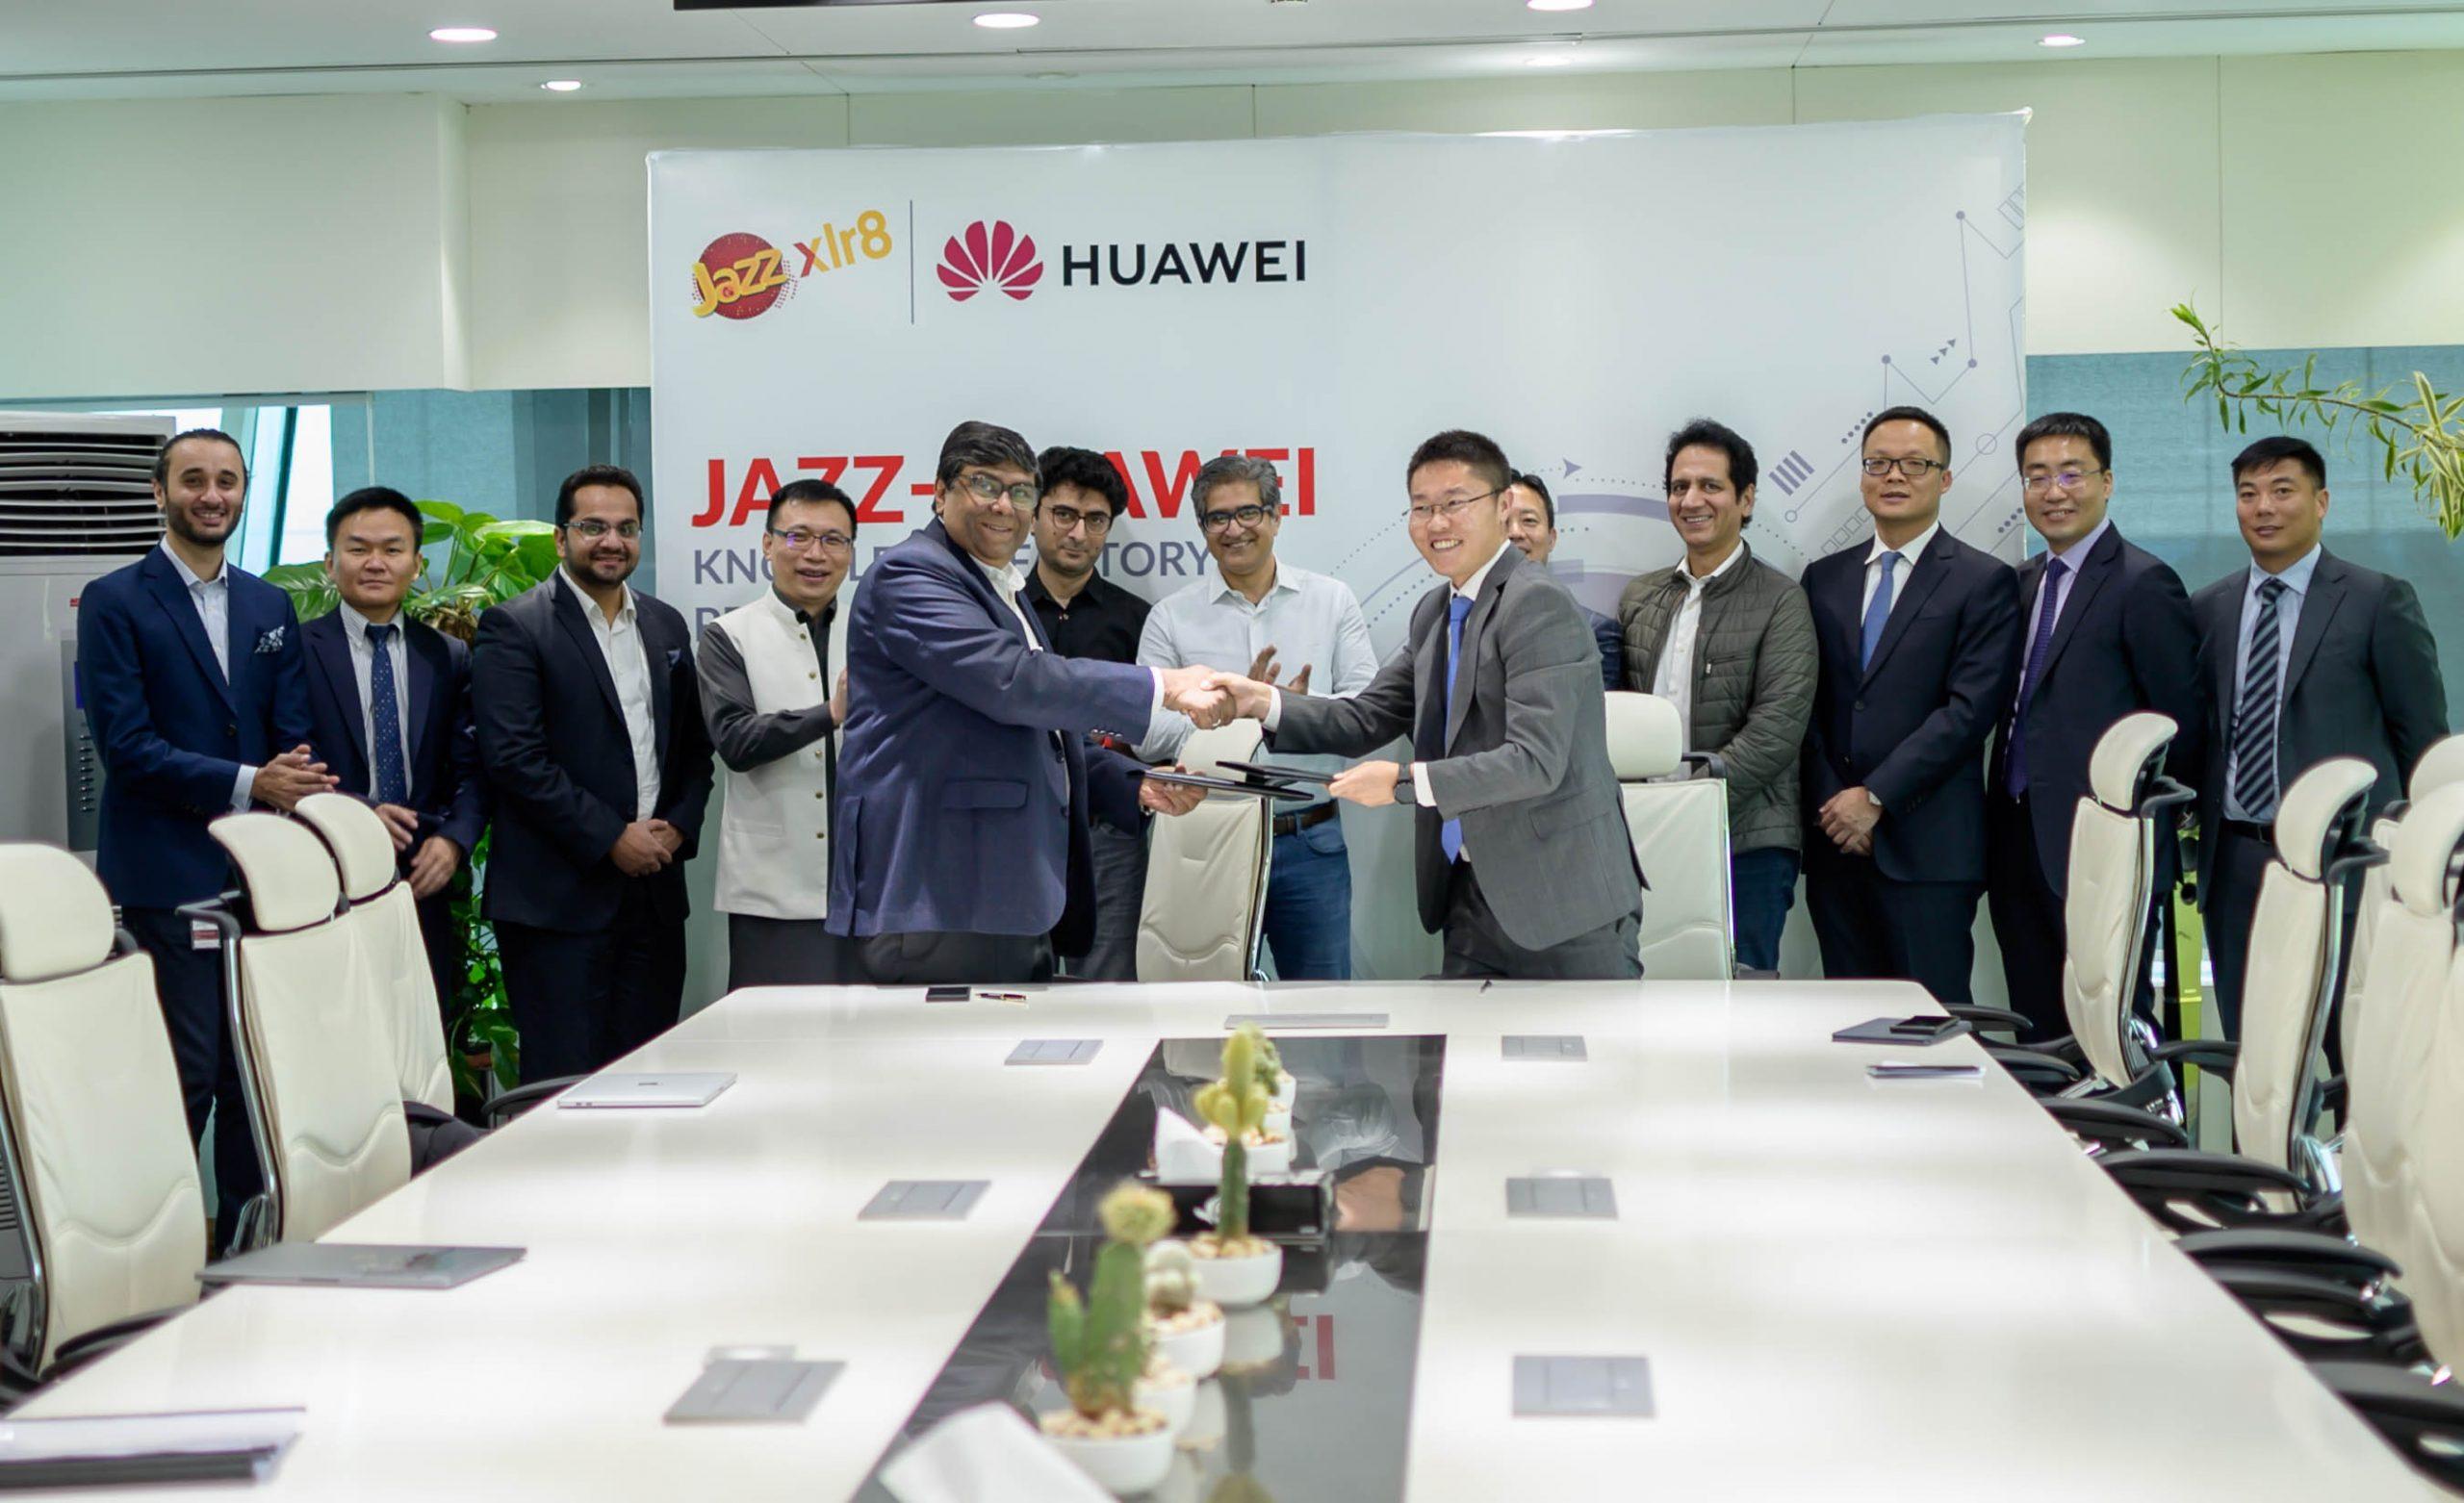 Huawei partners with Jazz to train individuals on digital technology